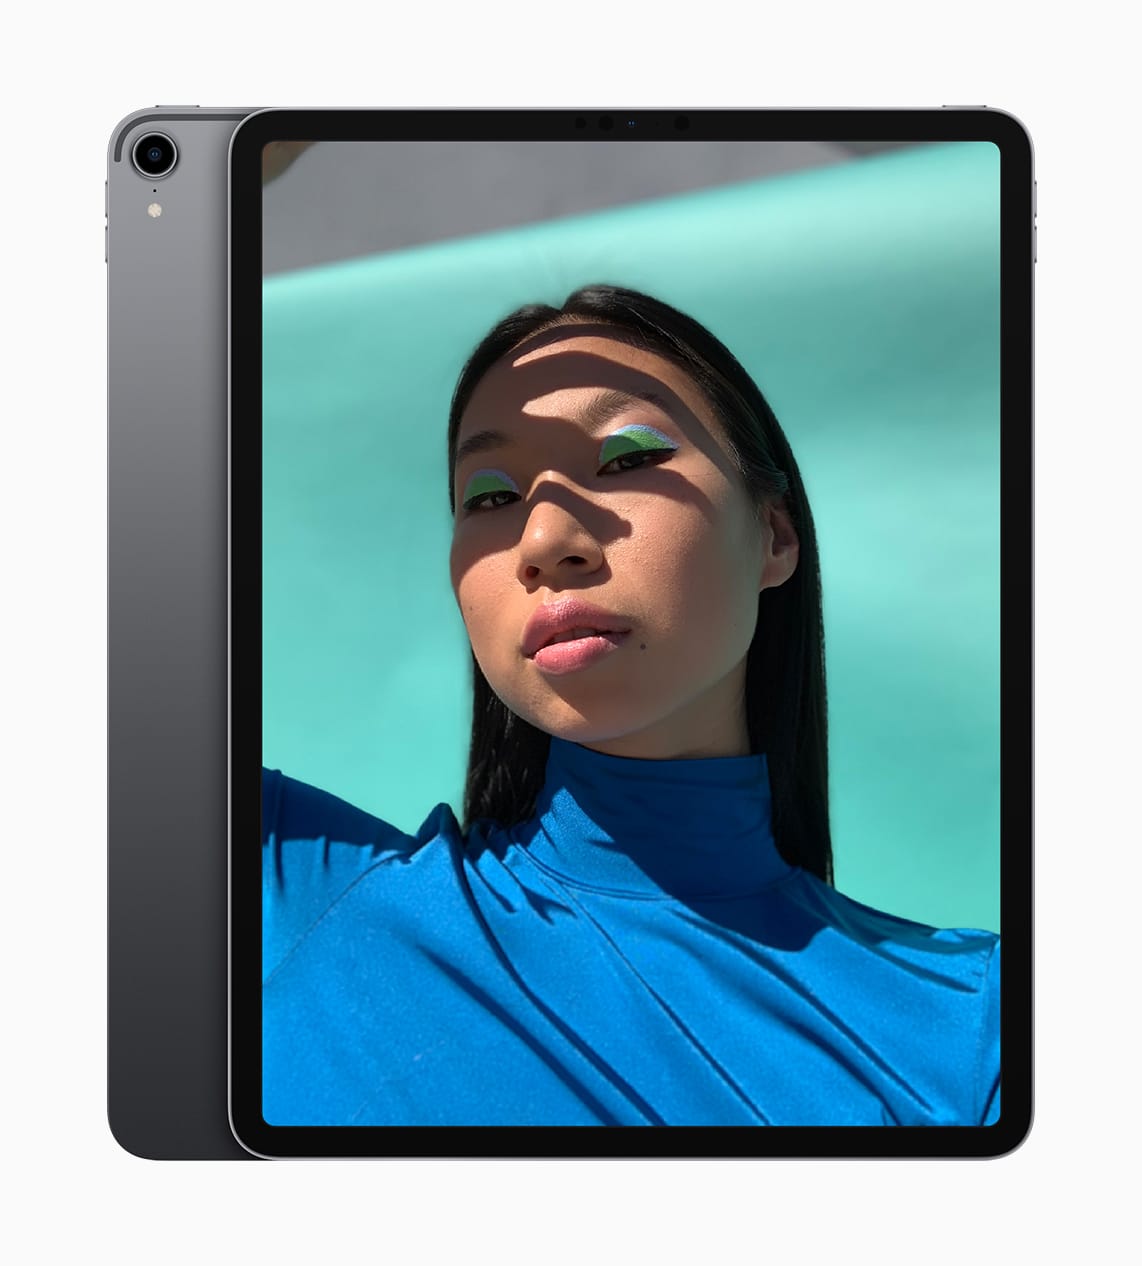 2018 iPad Pro is pricey, but well worth it.